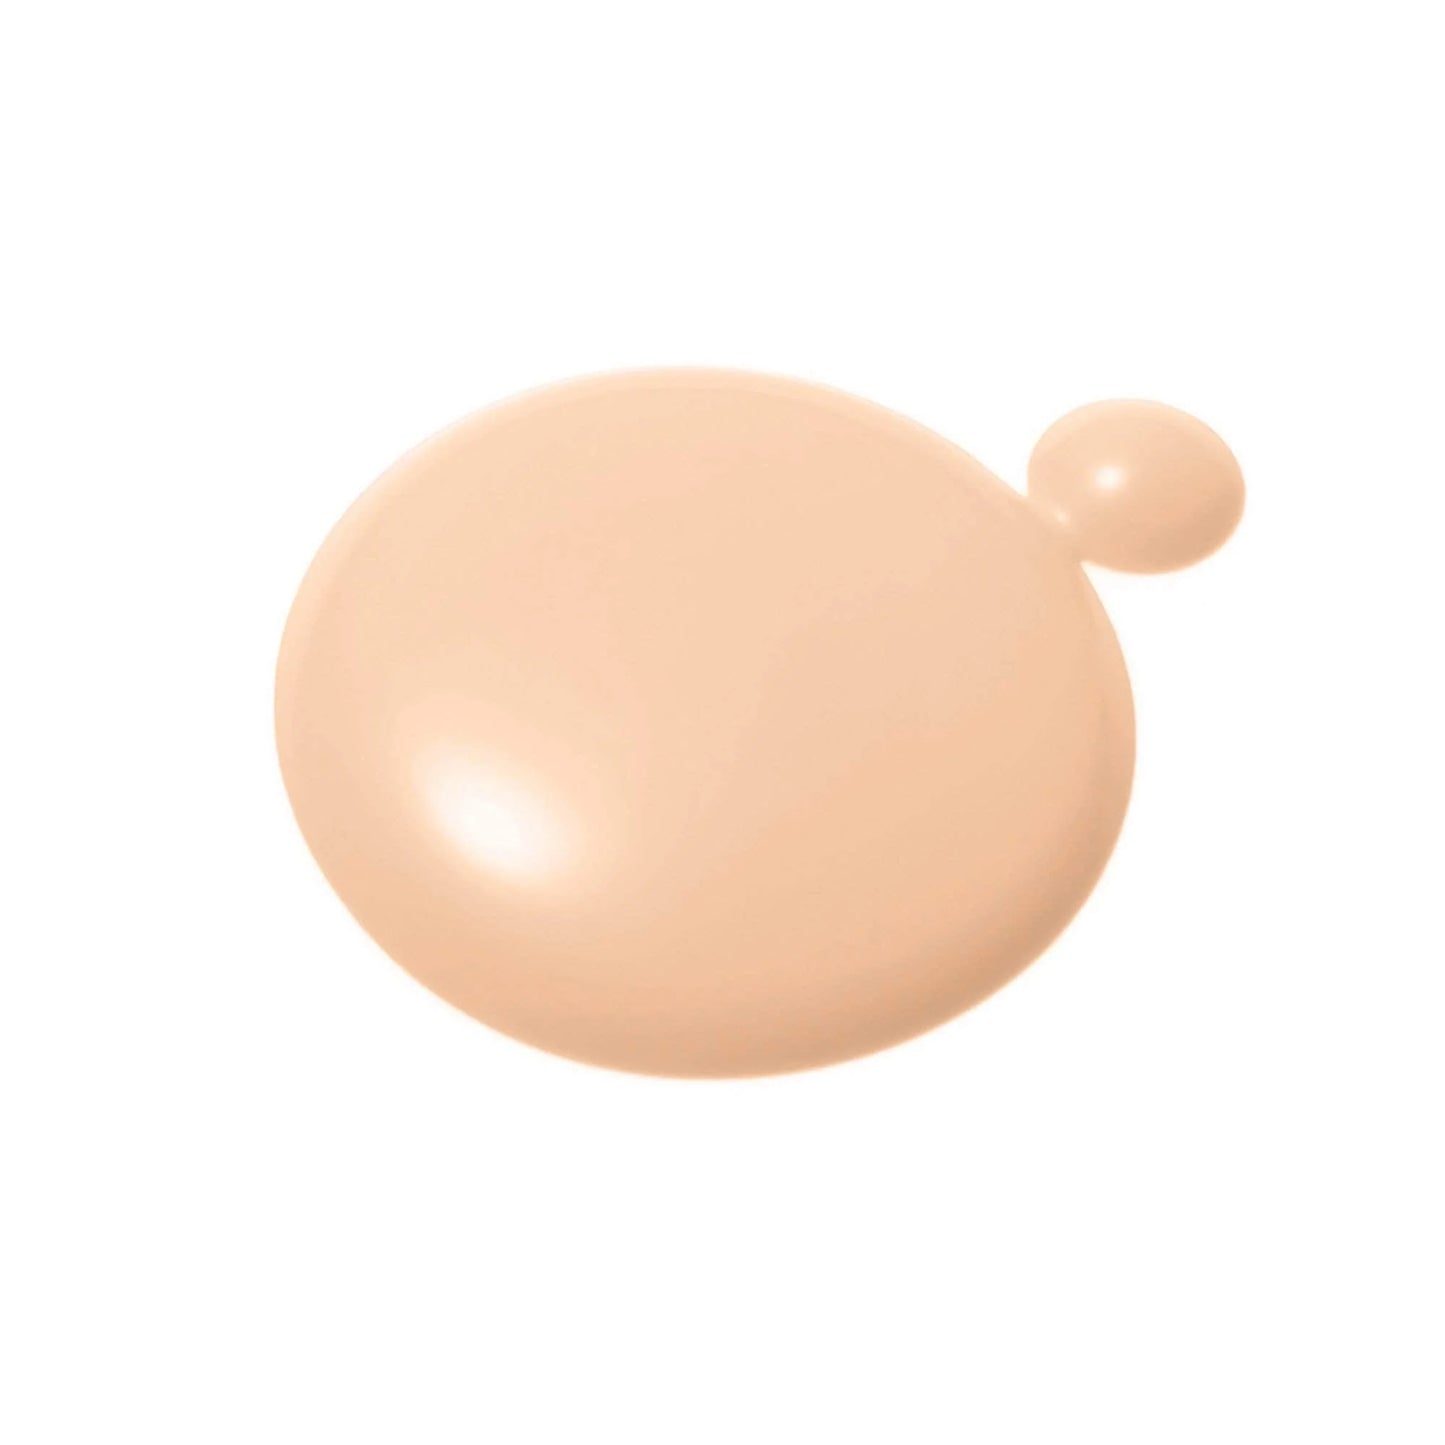 W7 Light Diffusing Concealer Cashmere